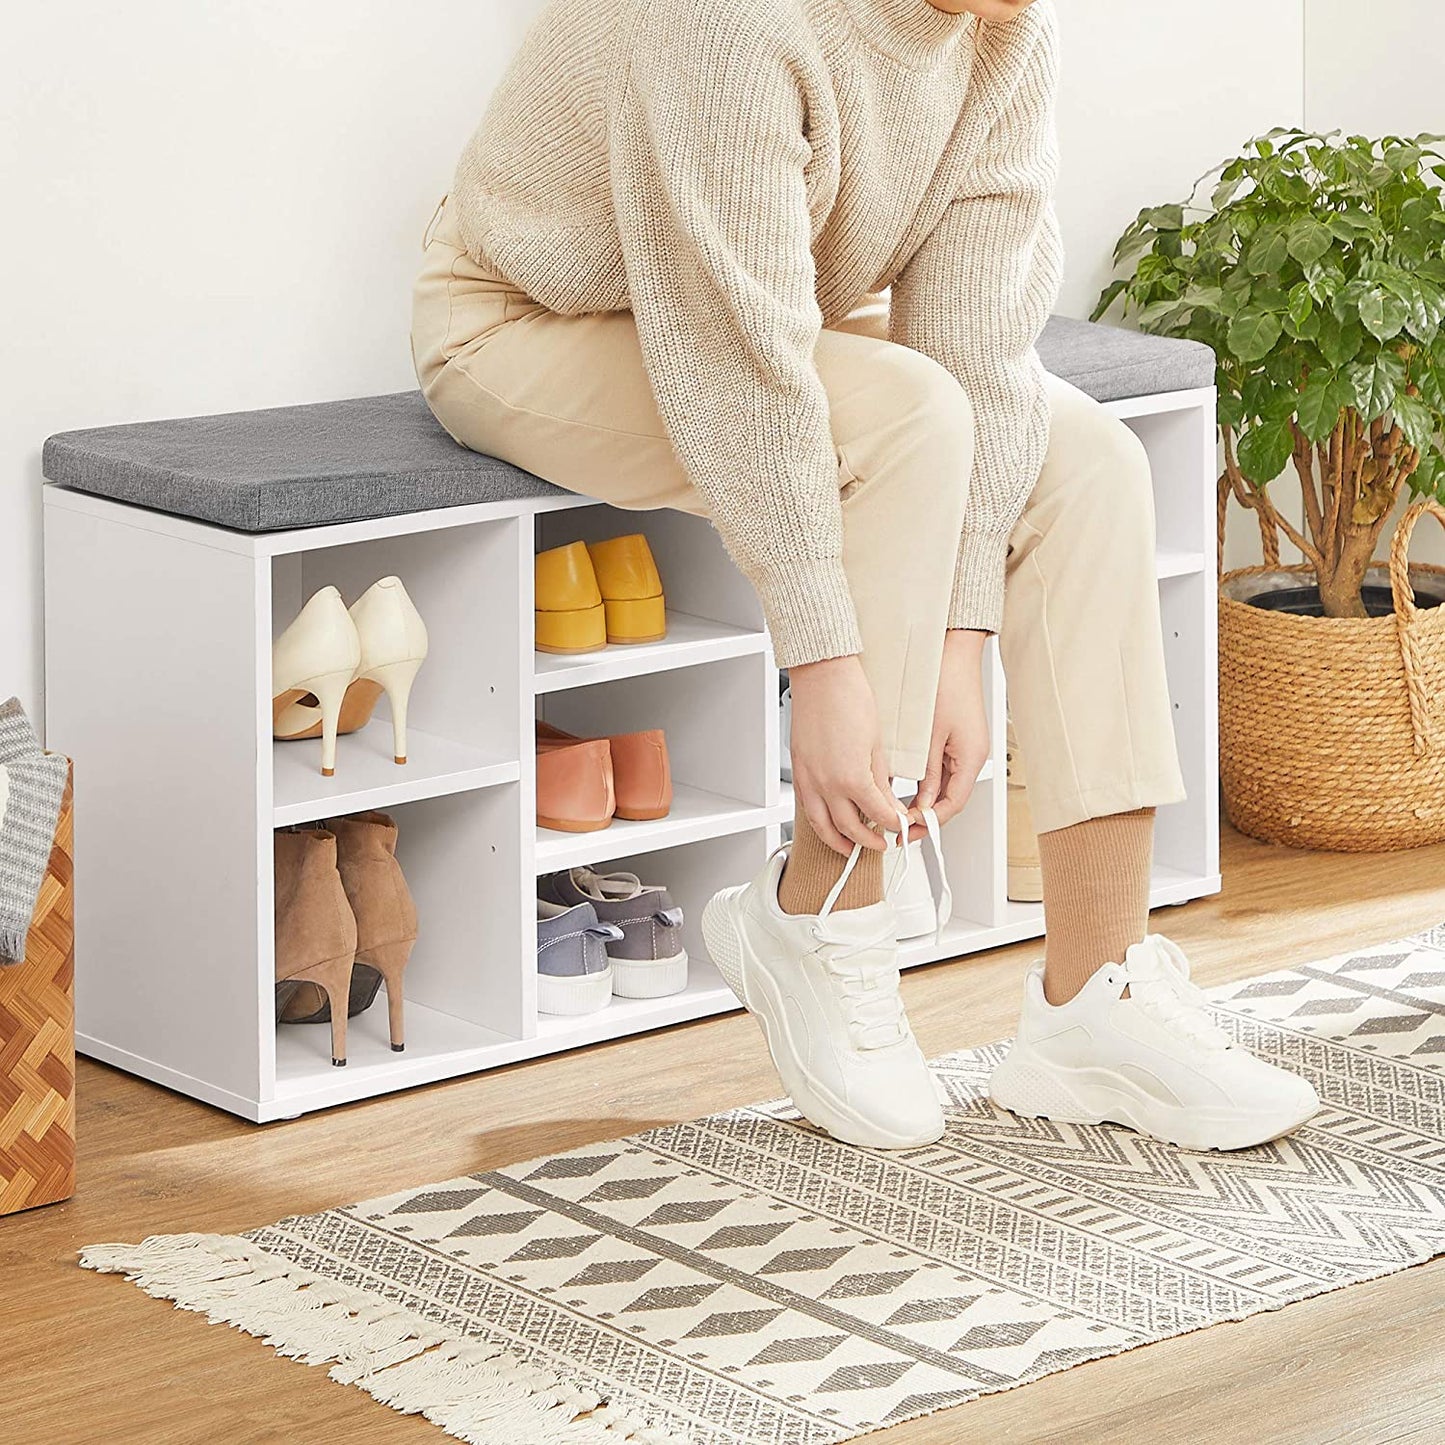 Benches : Shoe Cabinet Storage Bench with Cushion, Adjustable Shelves